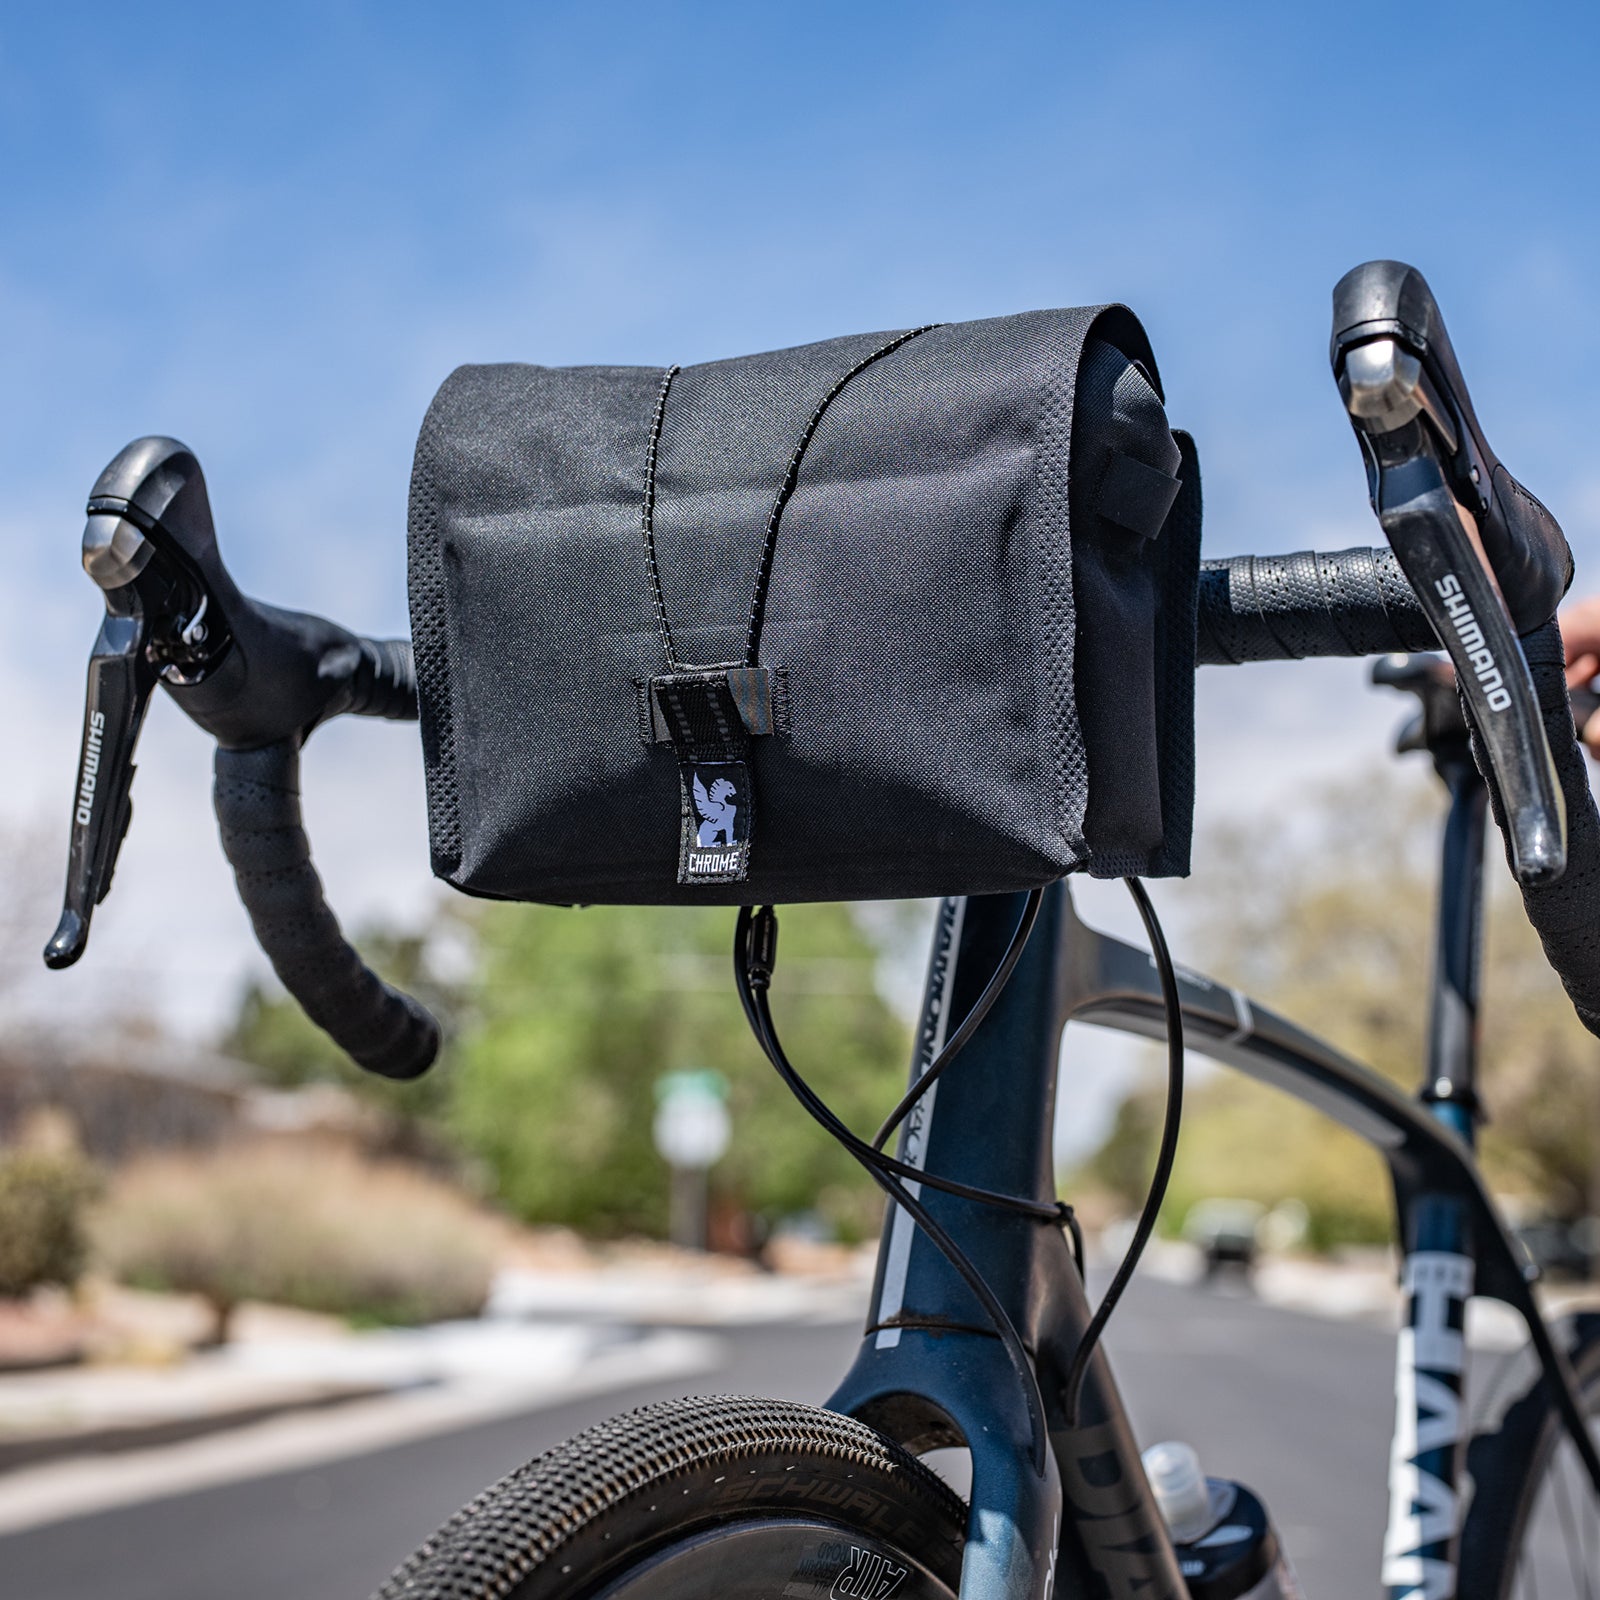 A Handlebar Bag Is the Most Underrated Bike Upgrade